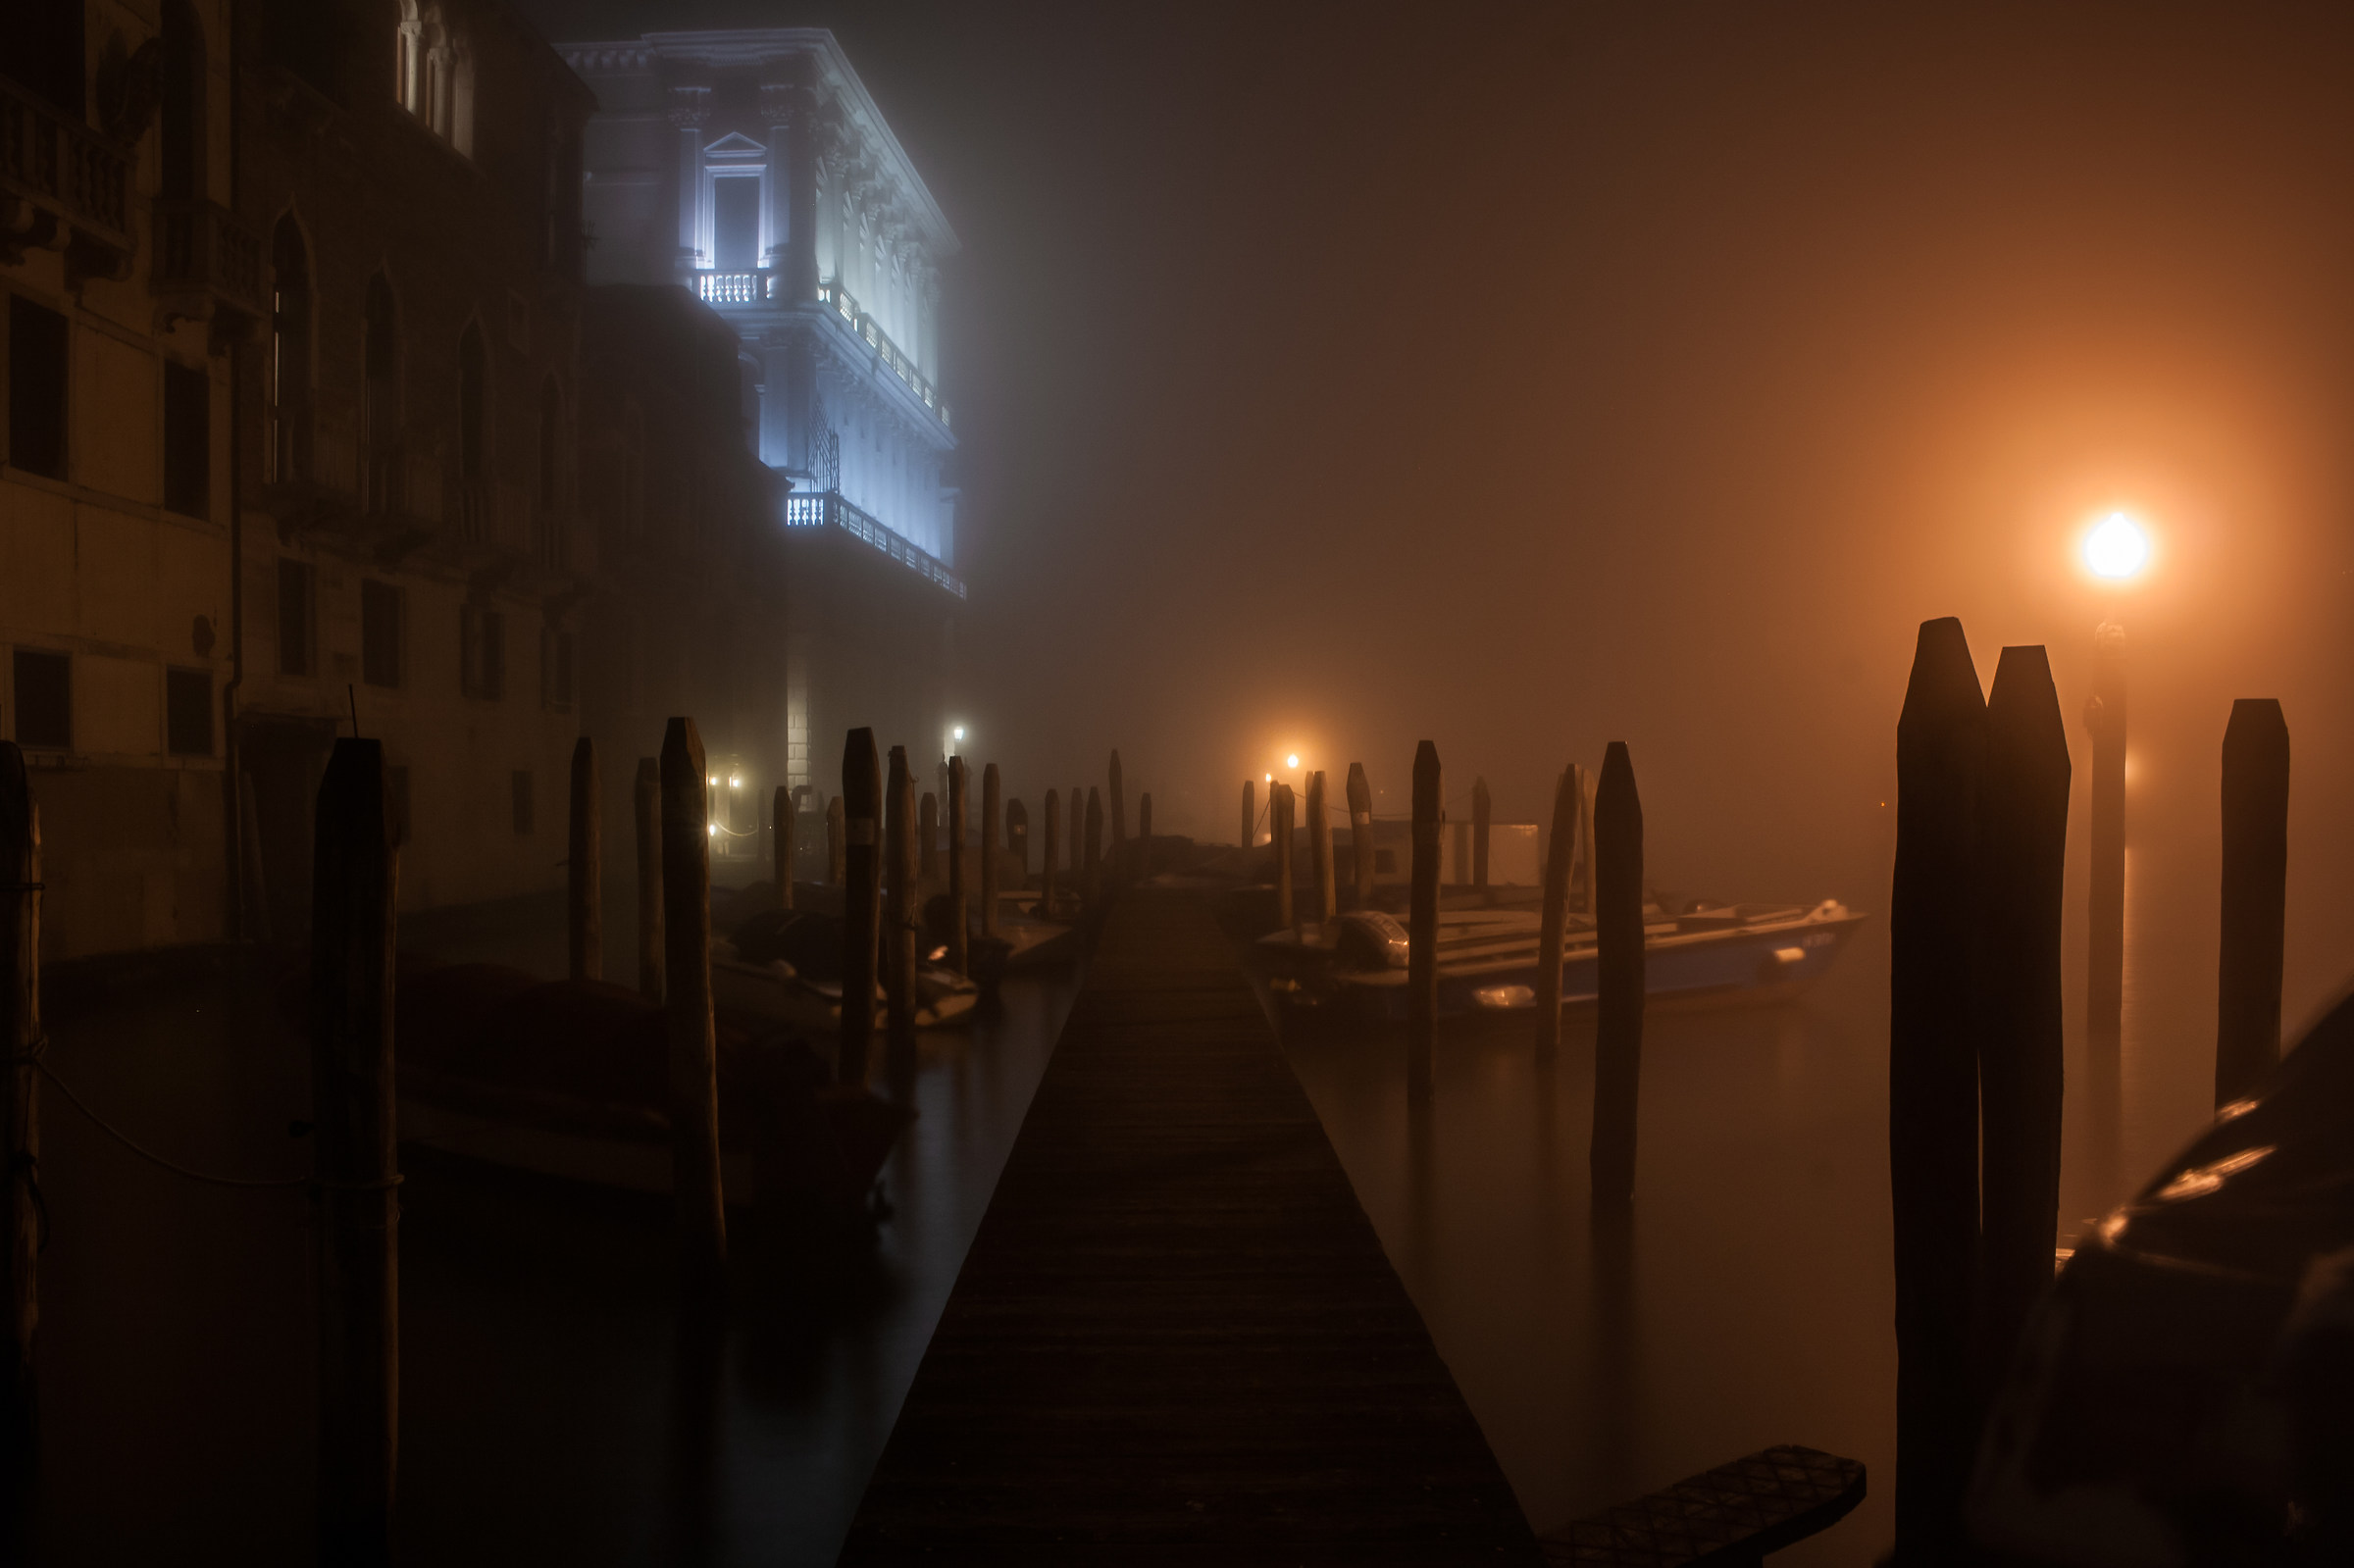 A small pier on a Grand Canal...